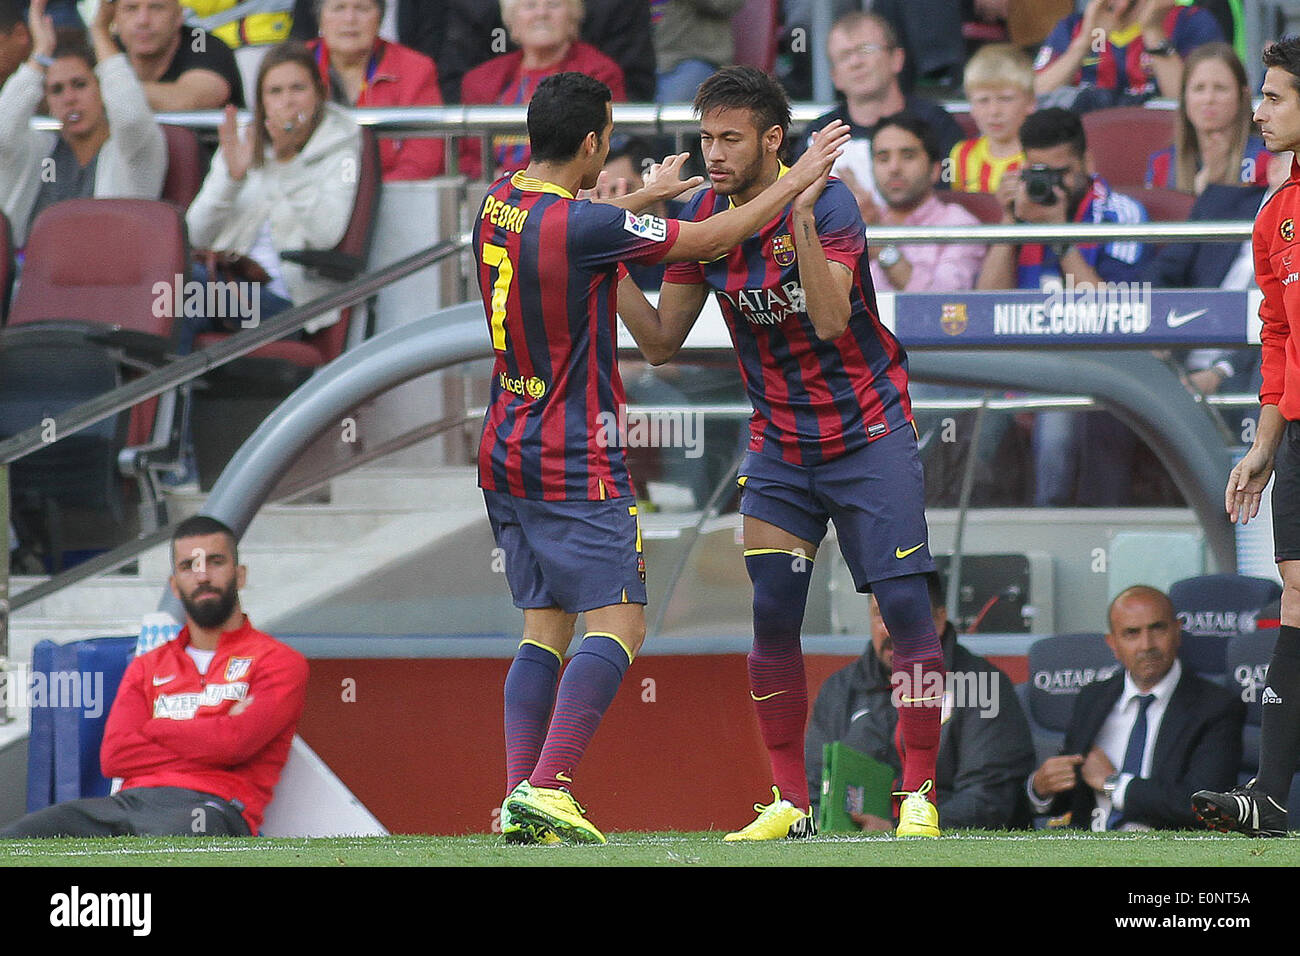 Barcelona, Spain. 17th May, 2014. Pedro substitution Neymar during the  spanish league match between FC. Barcelona